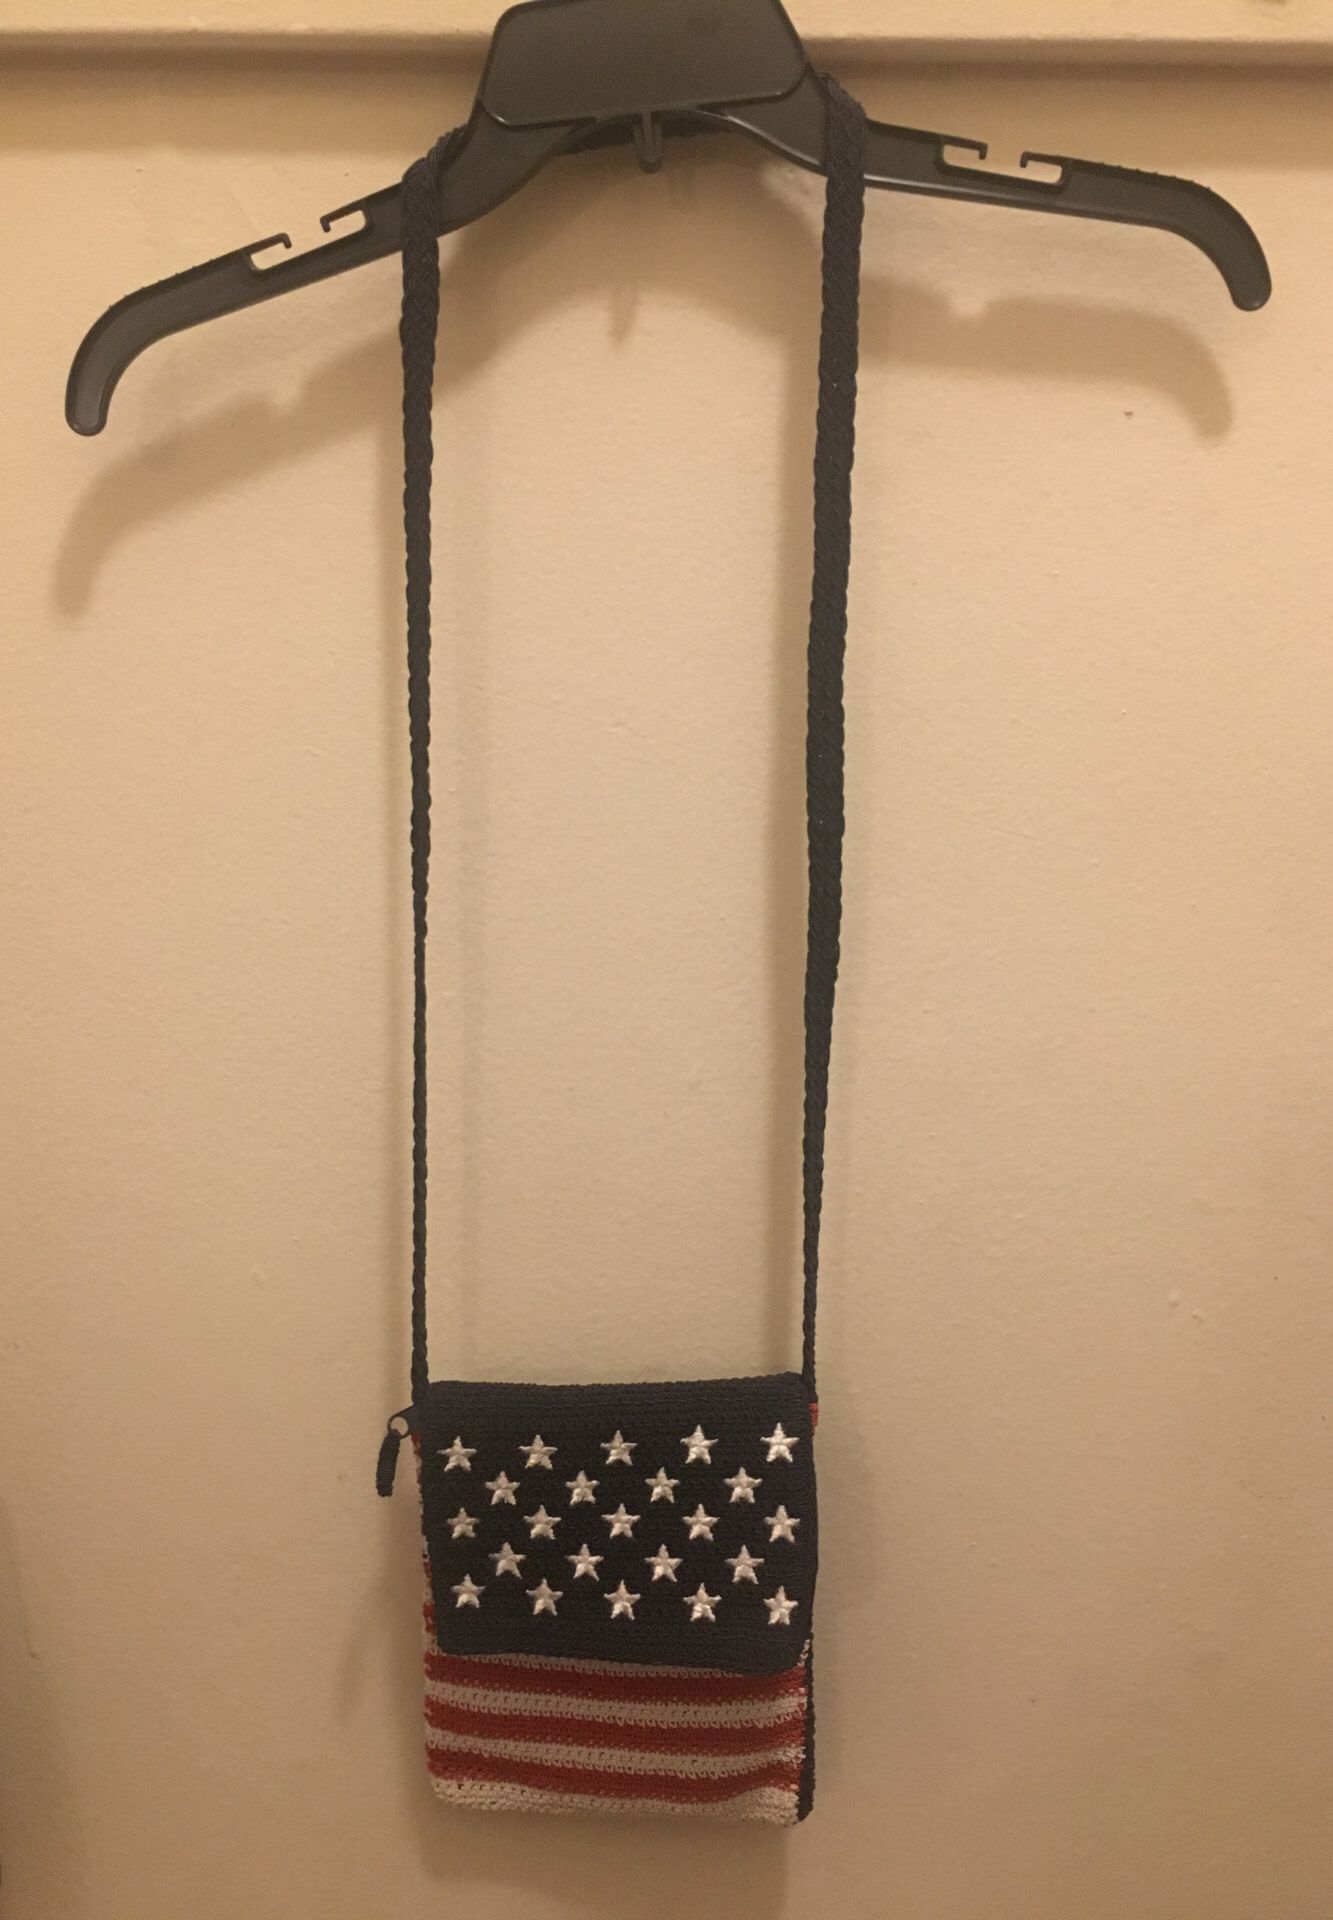 Get 4th of July ready with this cross body handbag!